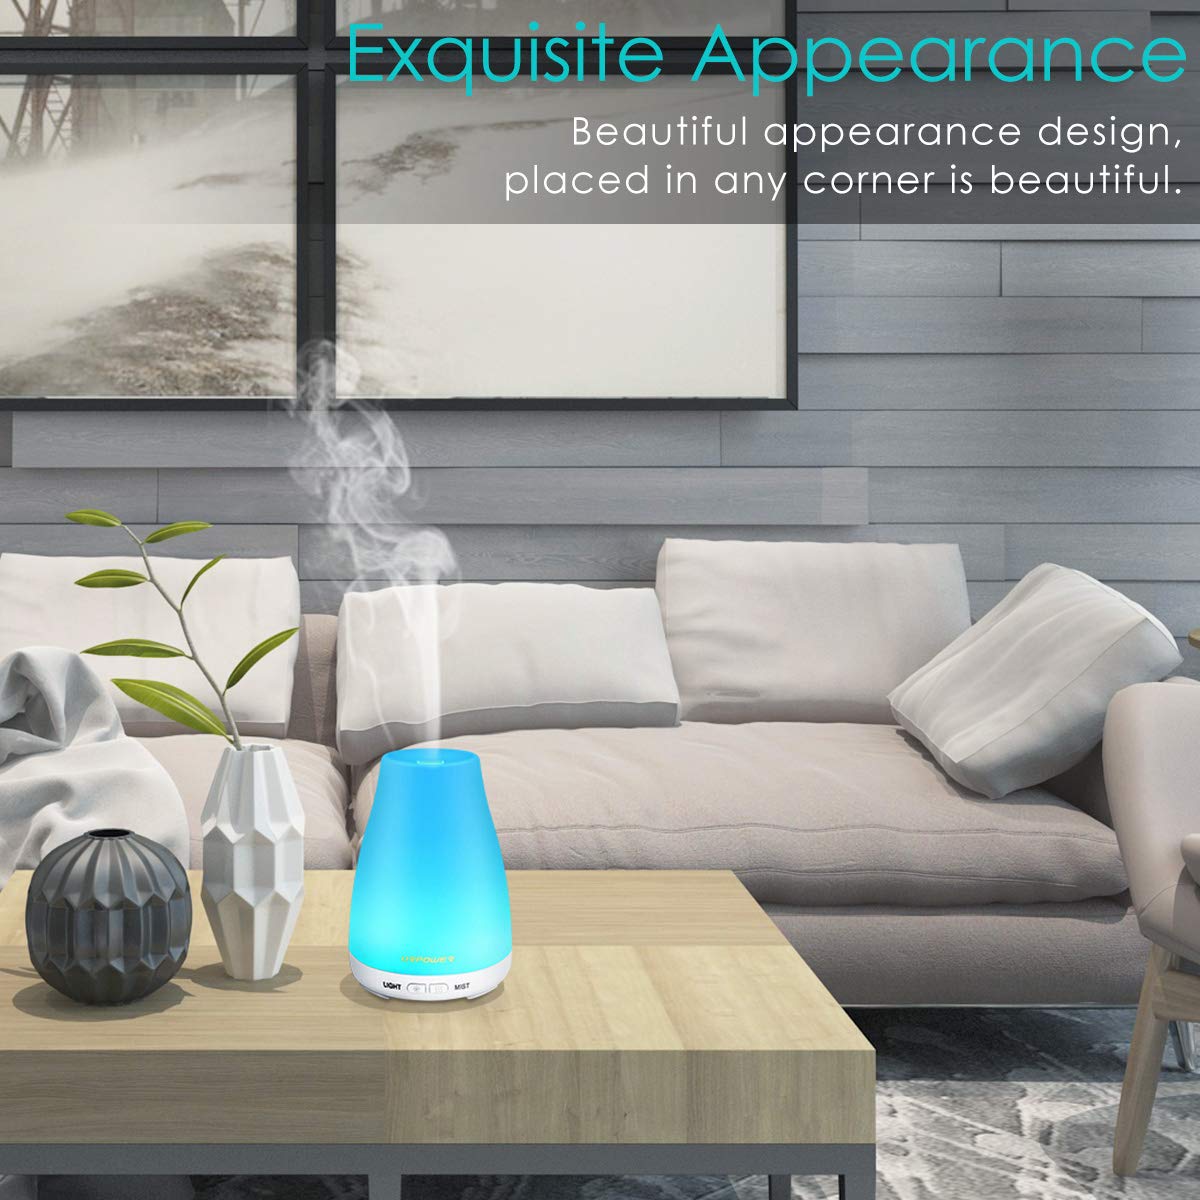 URPOWER 2nd Version Essential Oil Diffuser,Aroma Essential Oil Cool Mist Humidifier with Adjustable Mist Mode,Waterless Auto Shut-Off and 7 Color Lights Changing for Home Office Baby